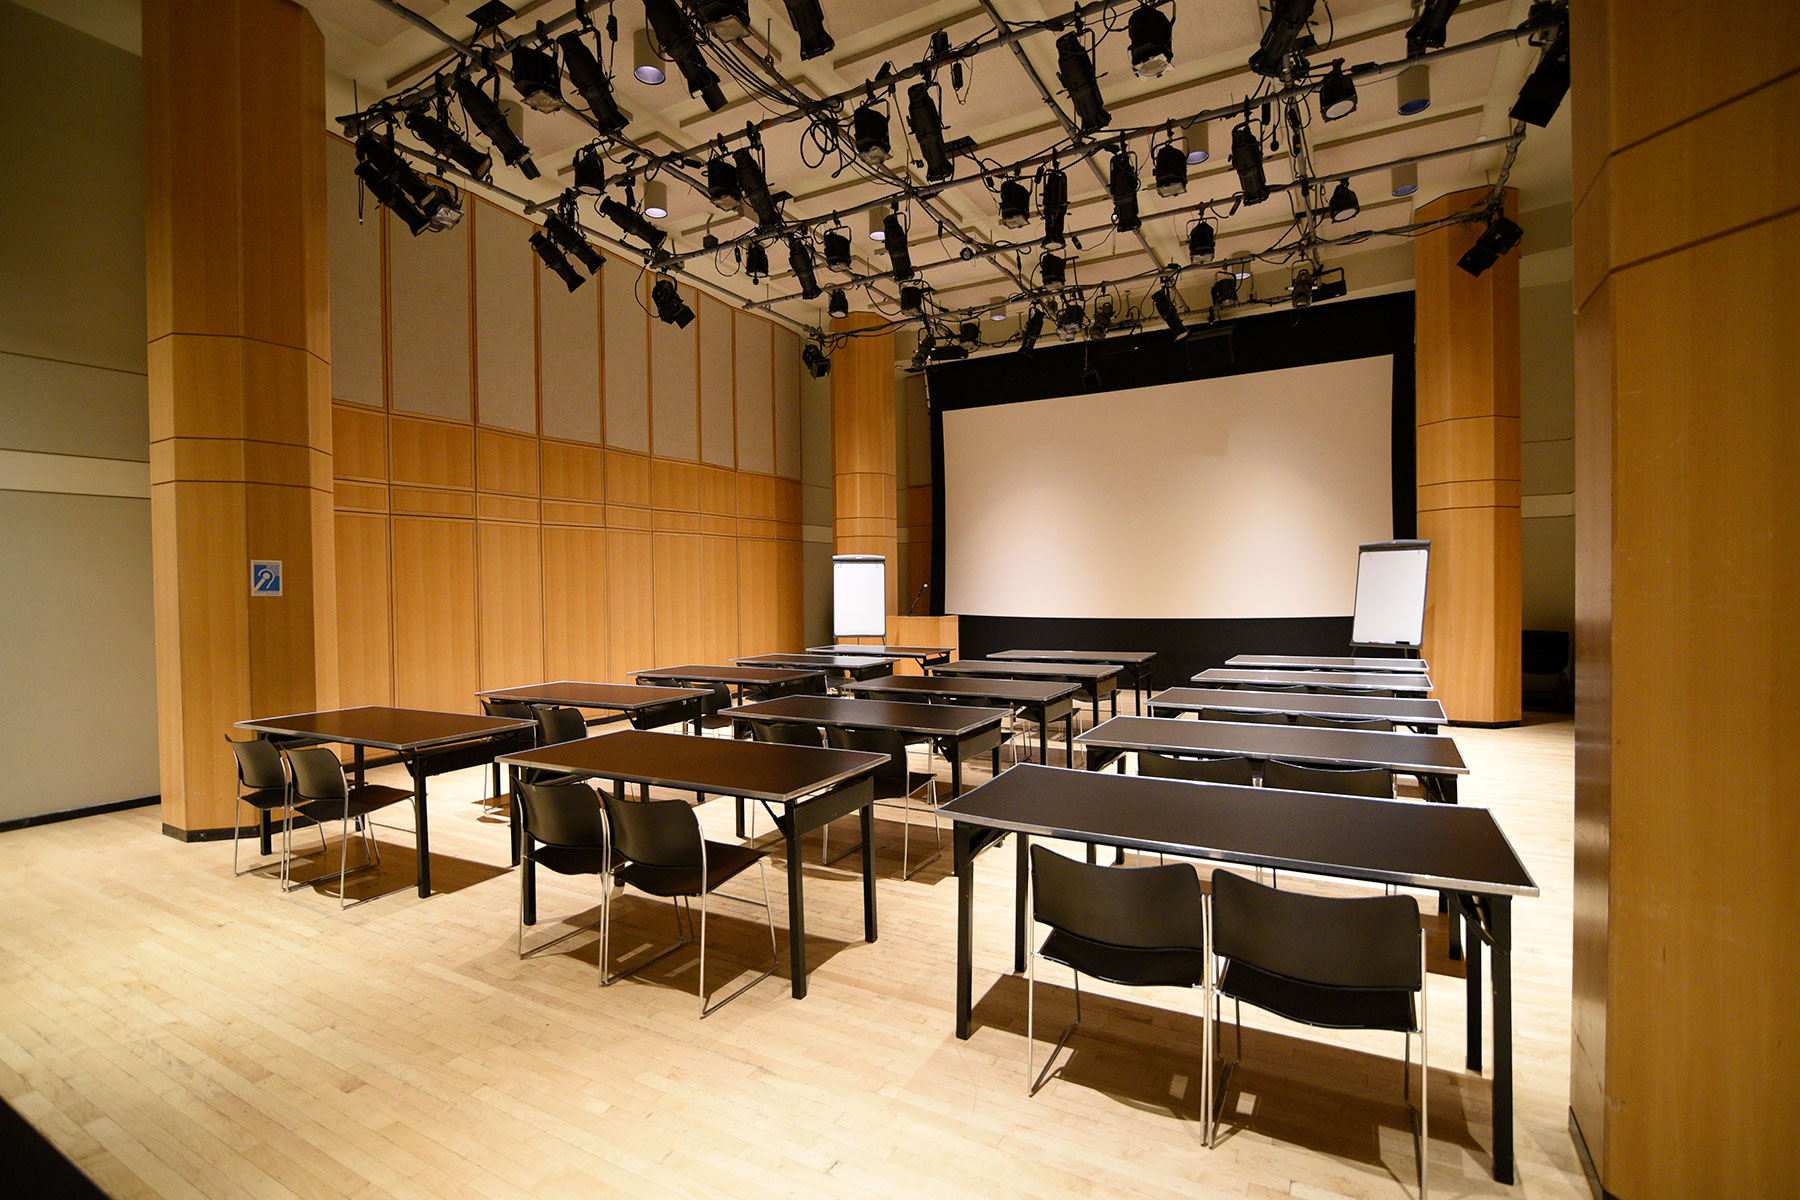 Segal Theatre - Black Box Theater Rental in NYC. Black box theater space set up for class or training.